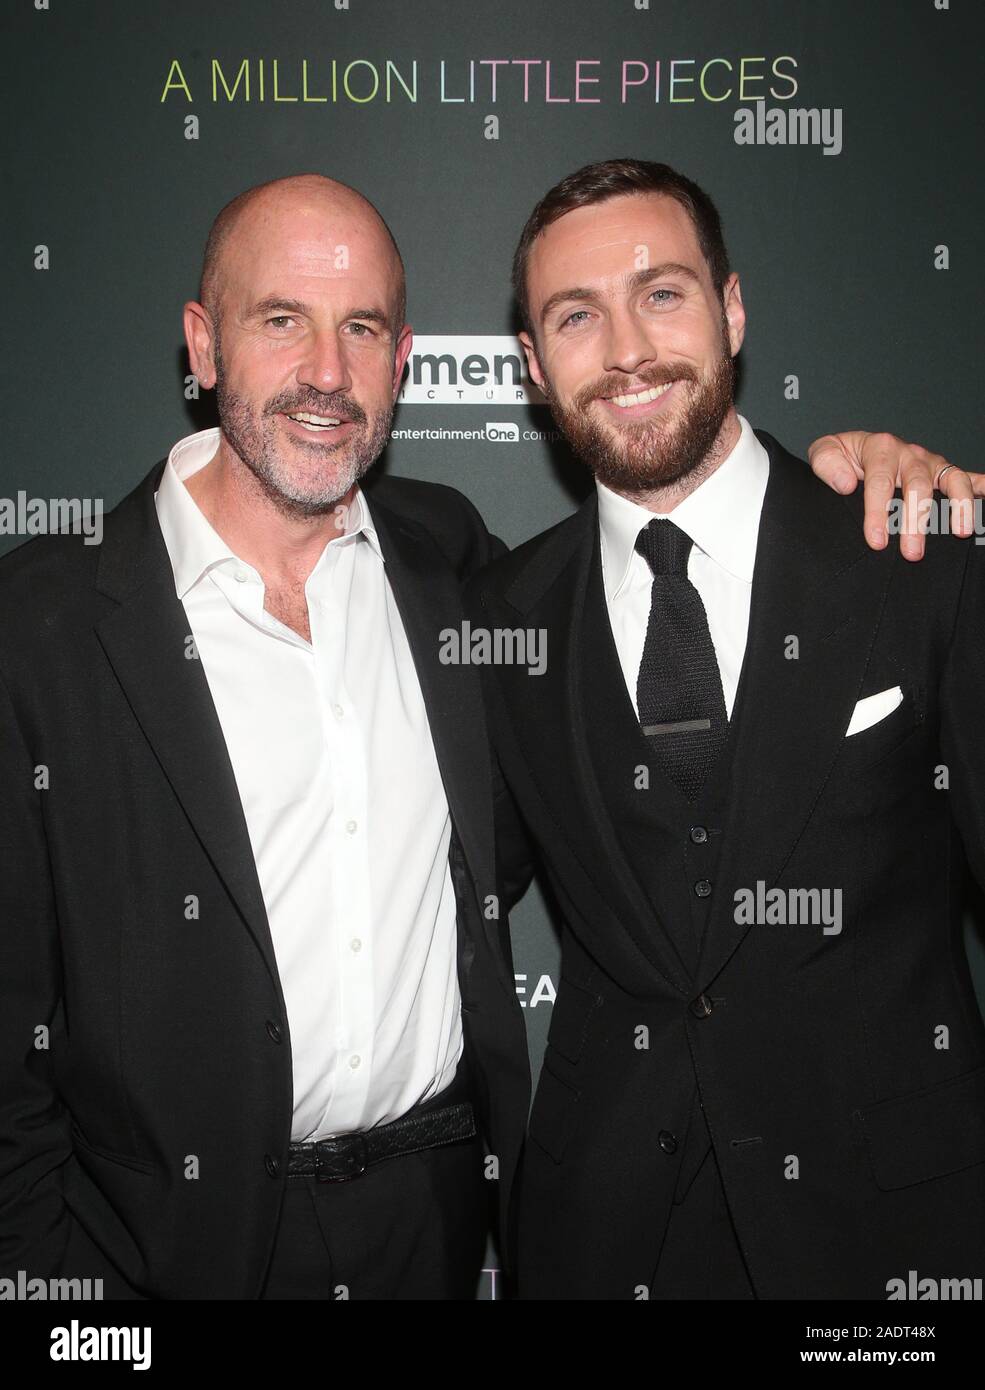 Hollywood, California, USA. 4th Dec, 2019. Aaron Taylor-Johnson, James Frey, at Special Screening Of Momentum Pictures' 'A Million Little Pieces' at The London Hotel in West Hollywood, California . Credit Faye Sadou/MediaPunch Credit: MediaPunch Inc/Alamy Live News Stock Photo